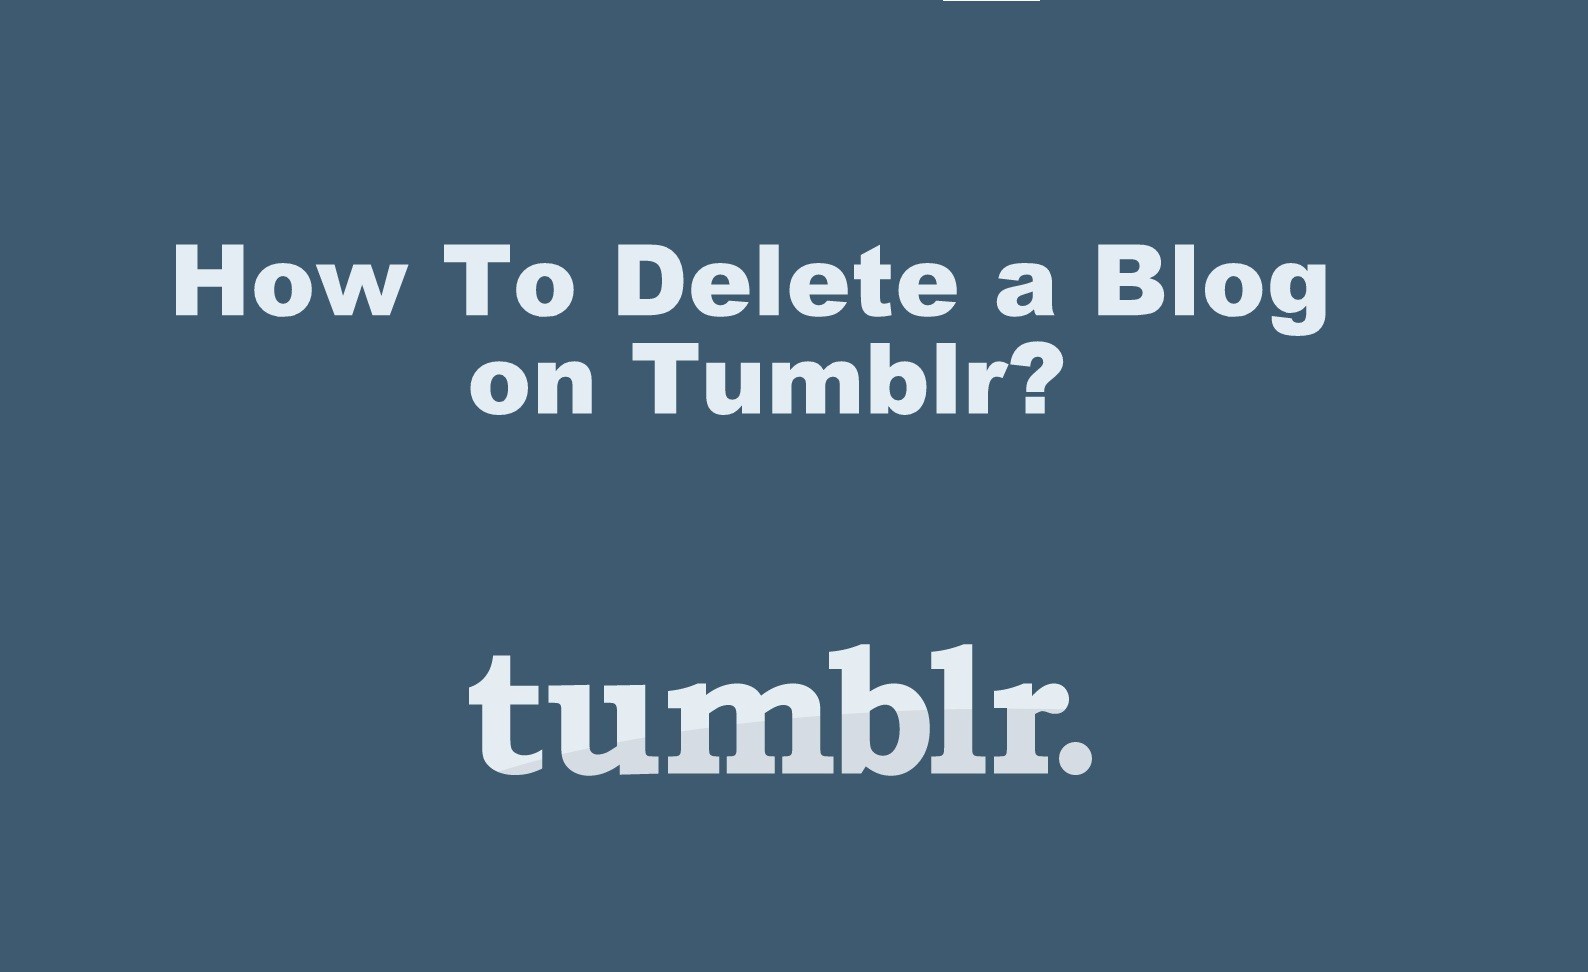 How To Delete a Blog on Tumblr [Primary & Secondary Blogs] - TechOwns